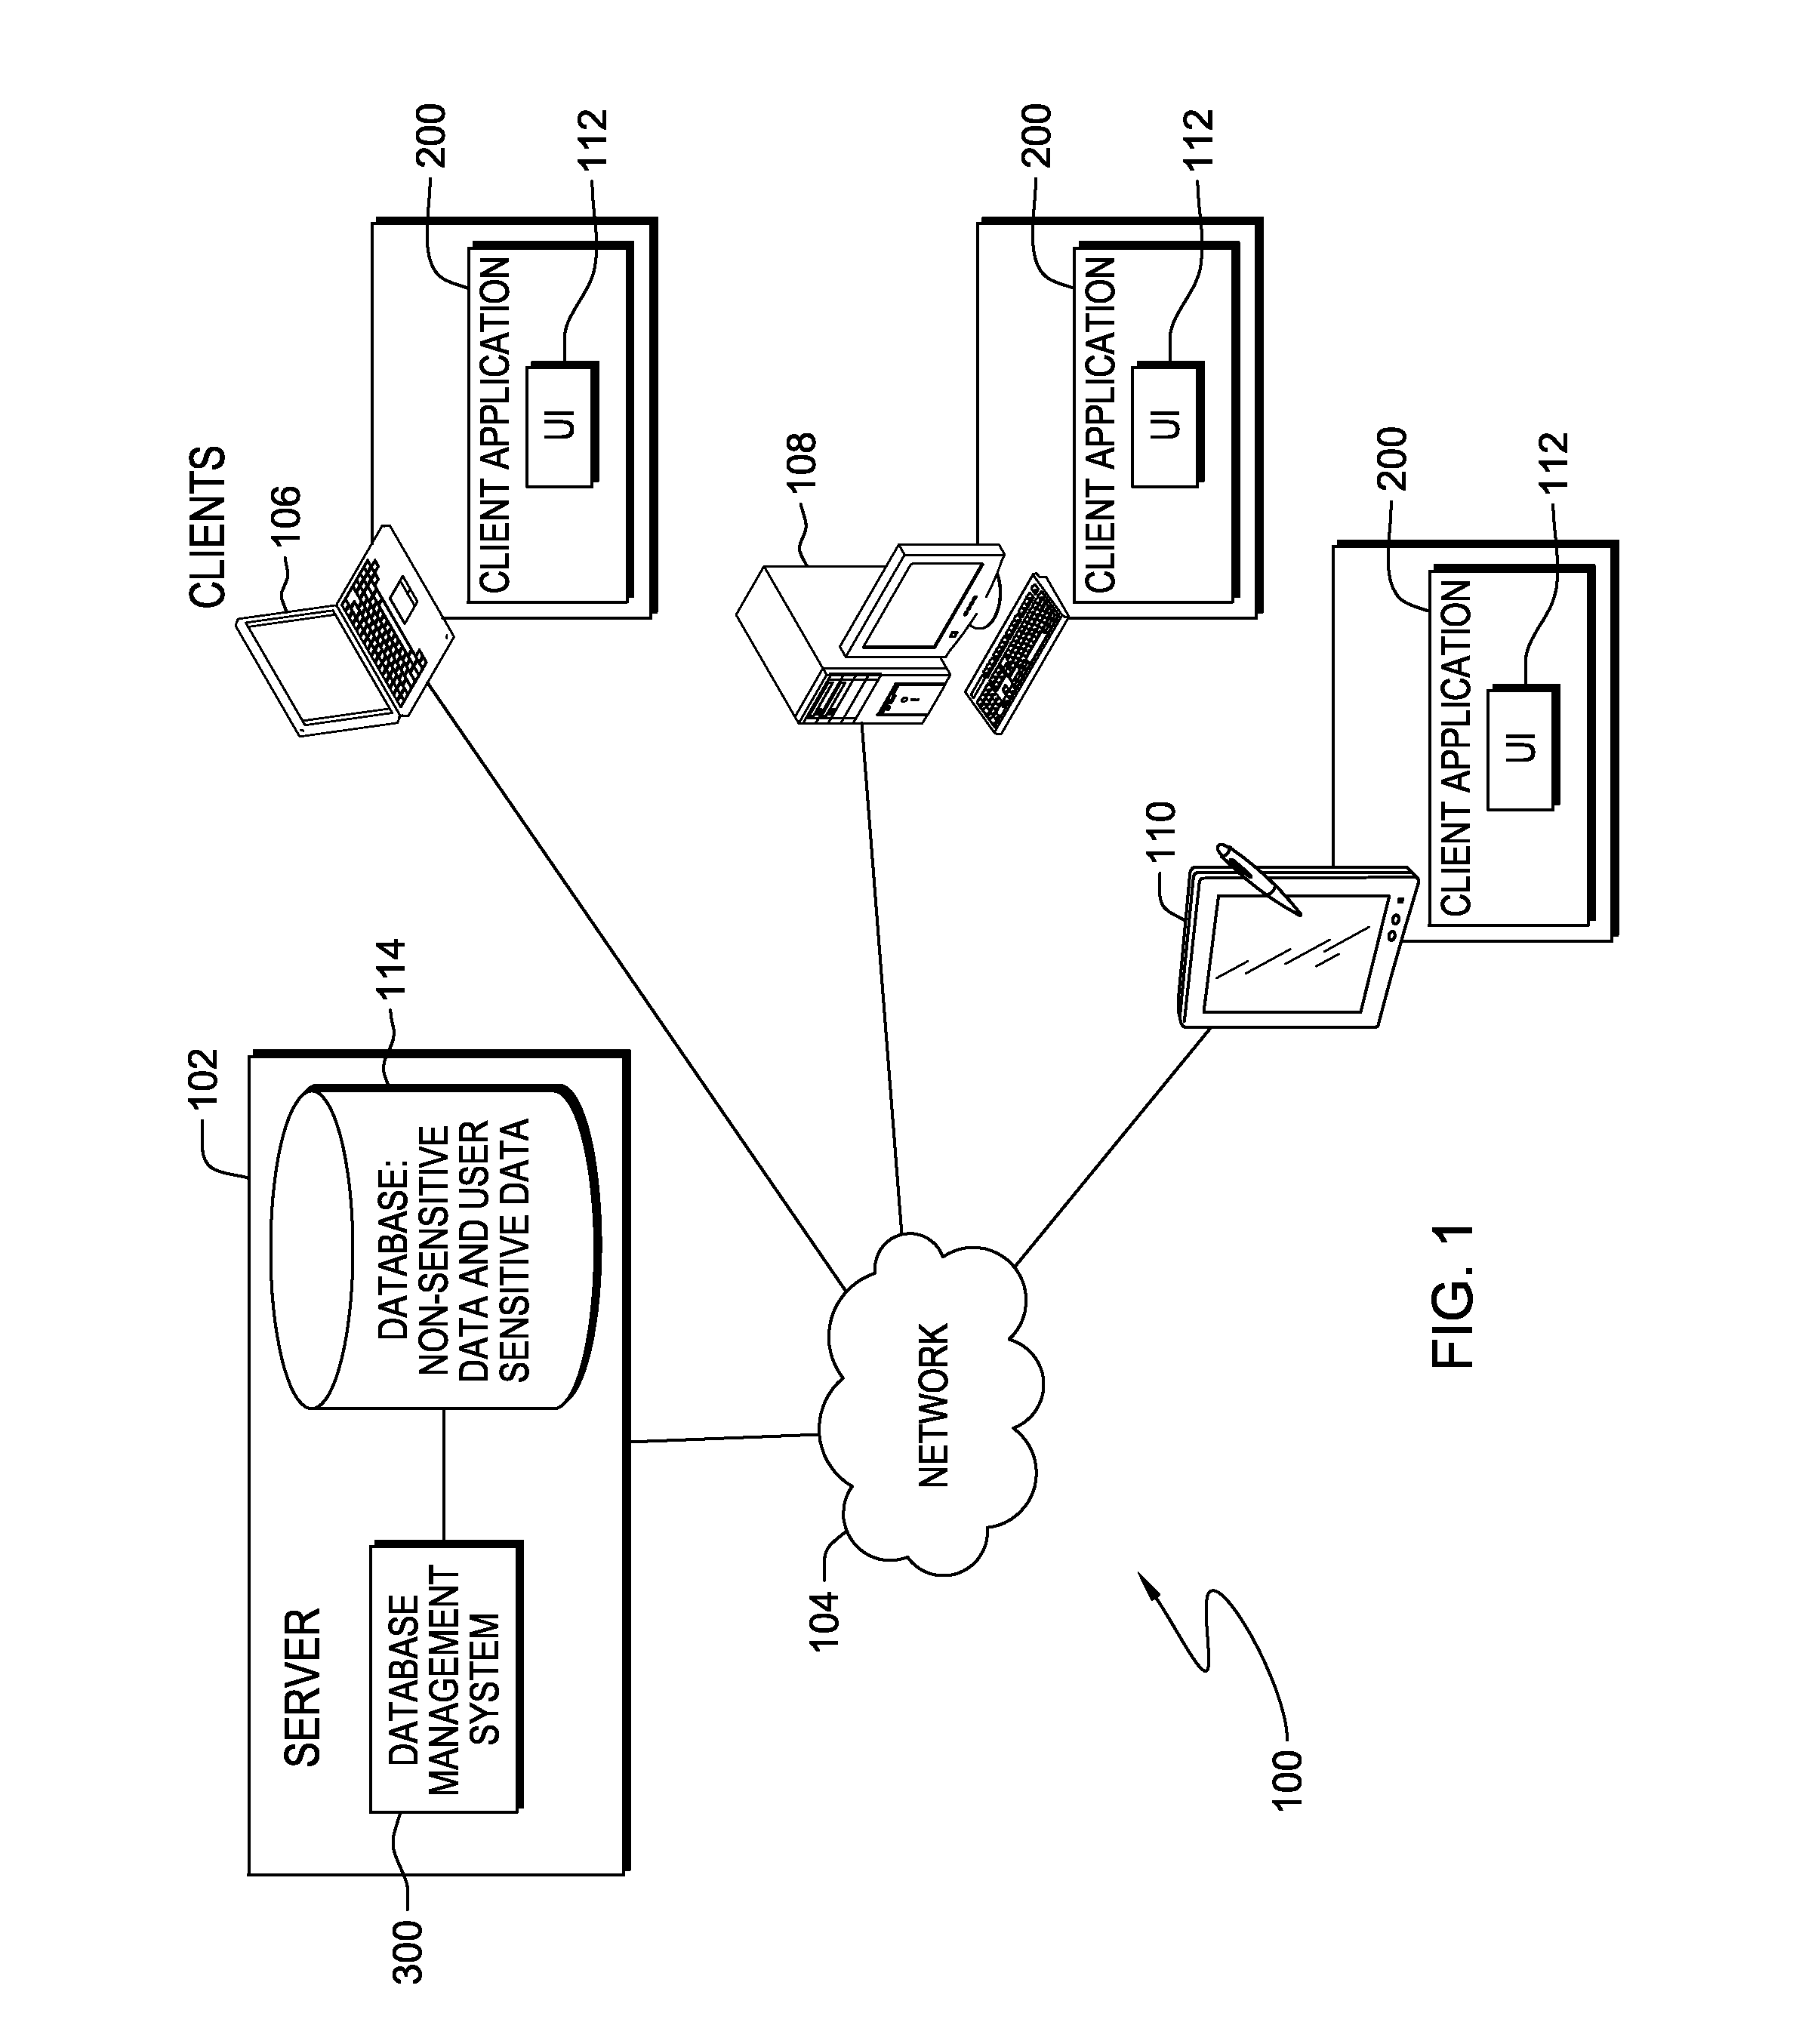 Field level database encryption using a transient key